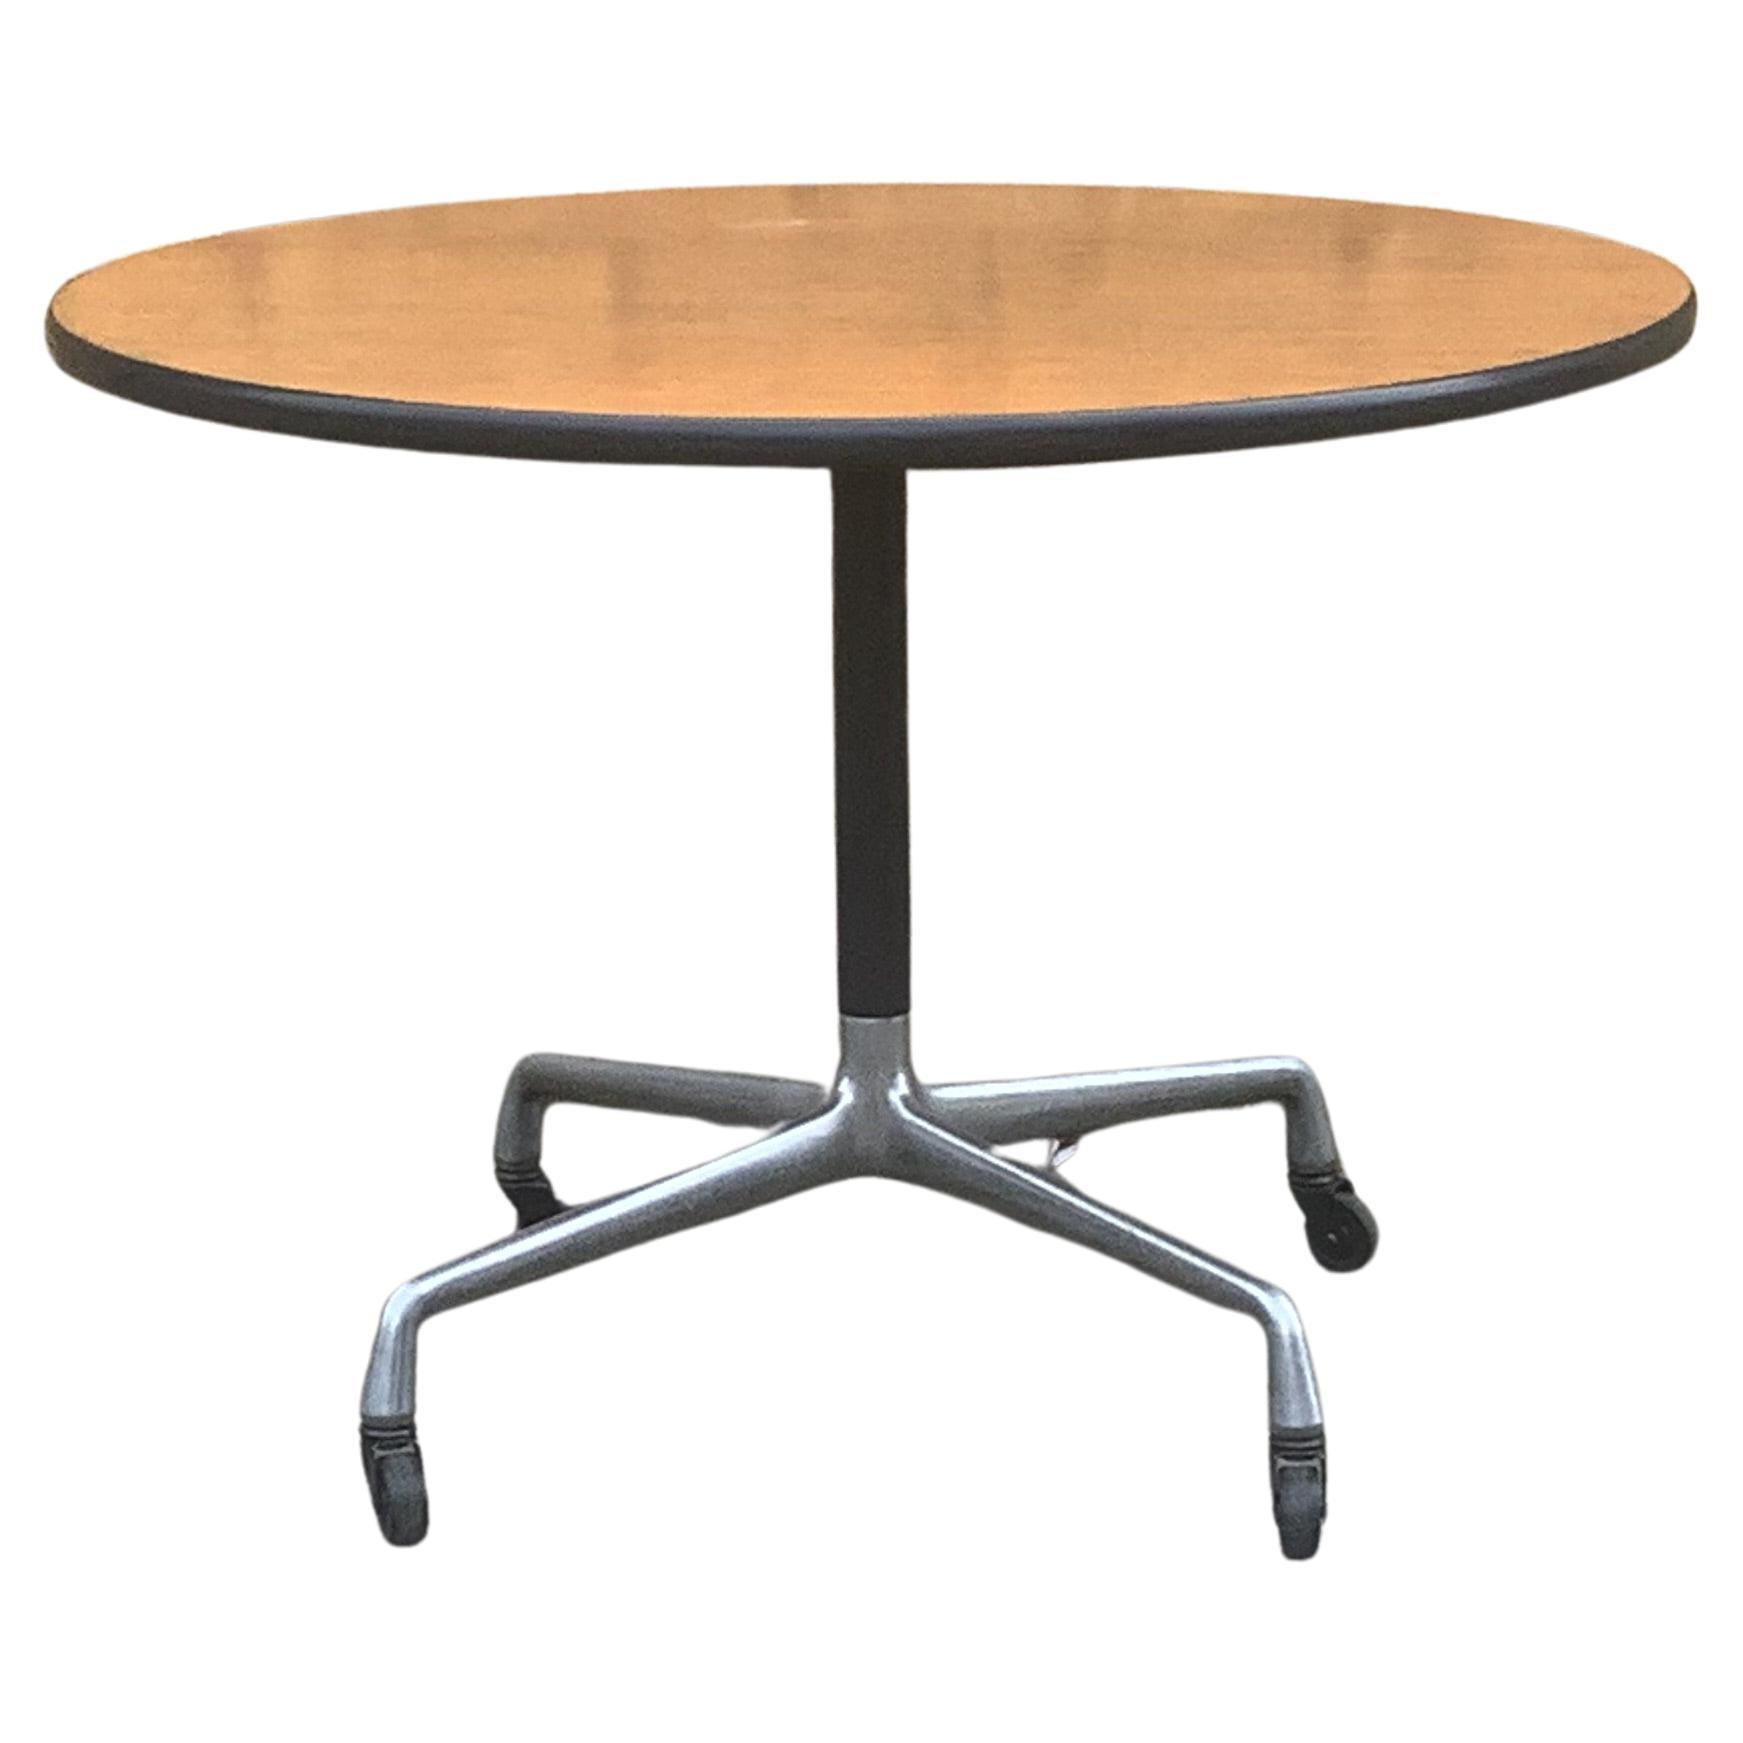 Herman Miller Eames Wood Top Dining Table on Aluminium Base with Casters For Sale